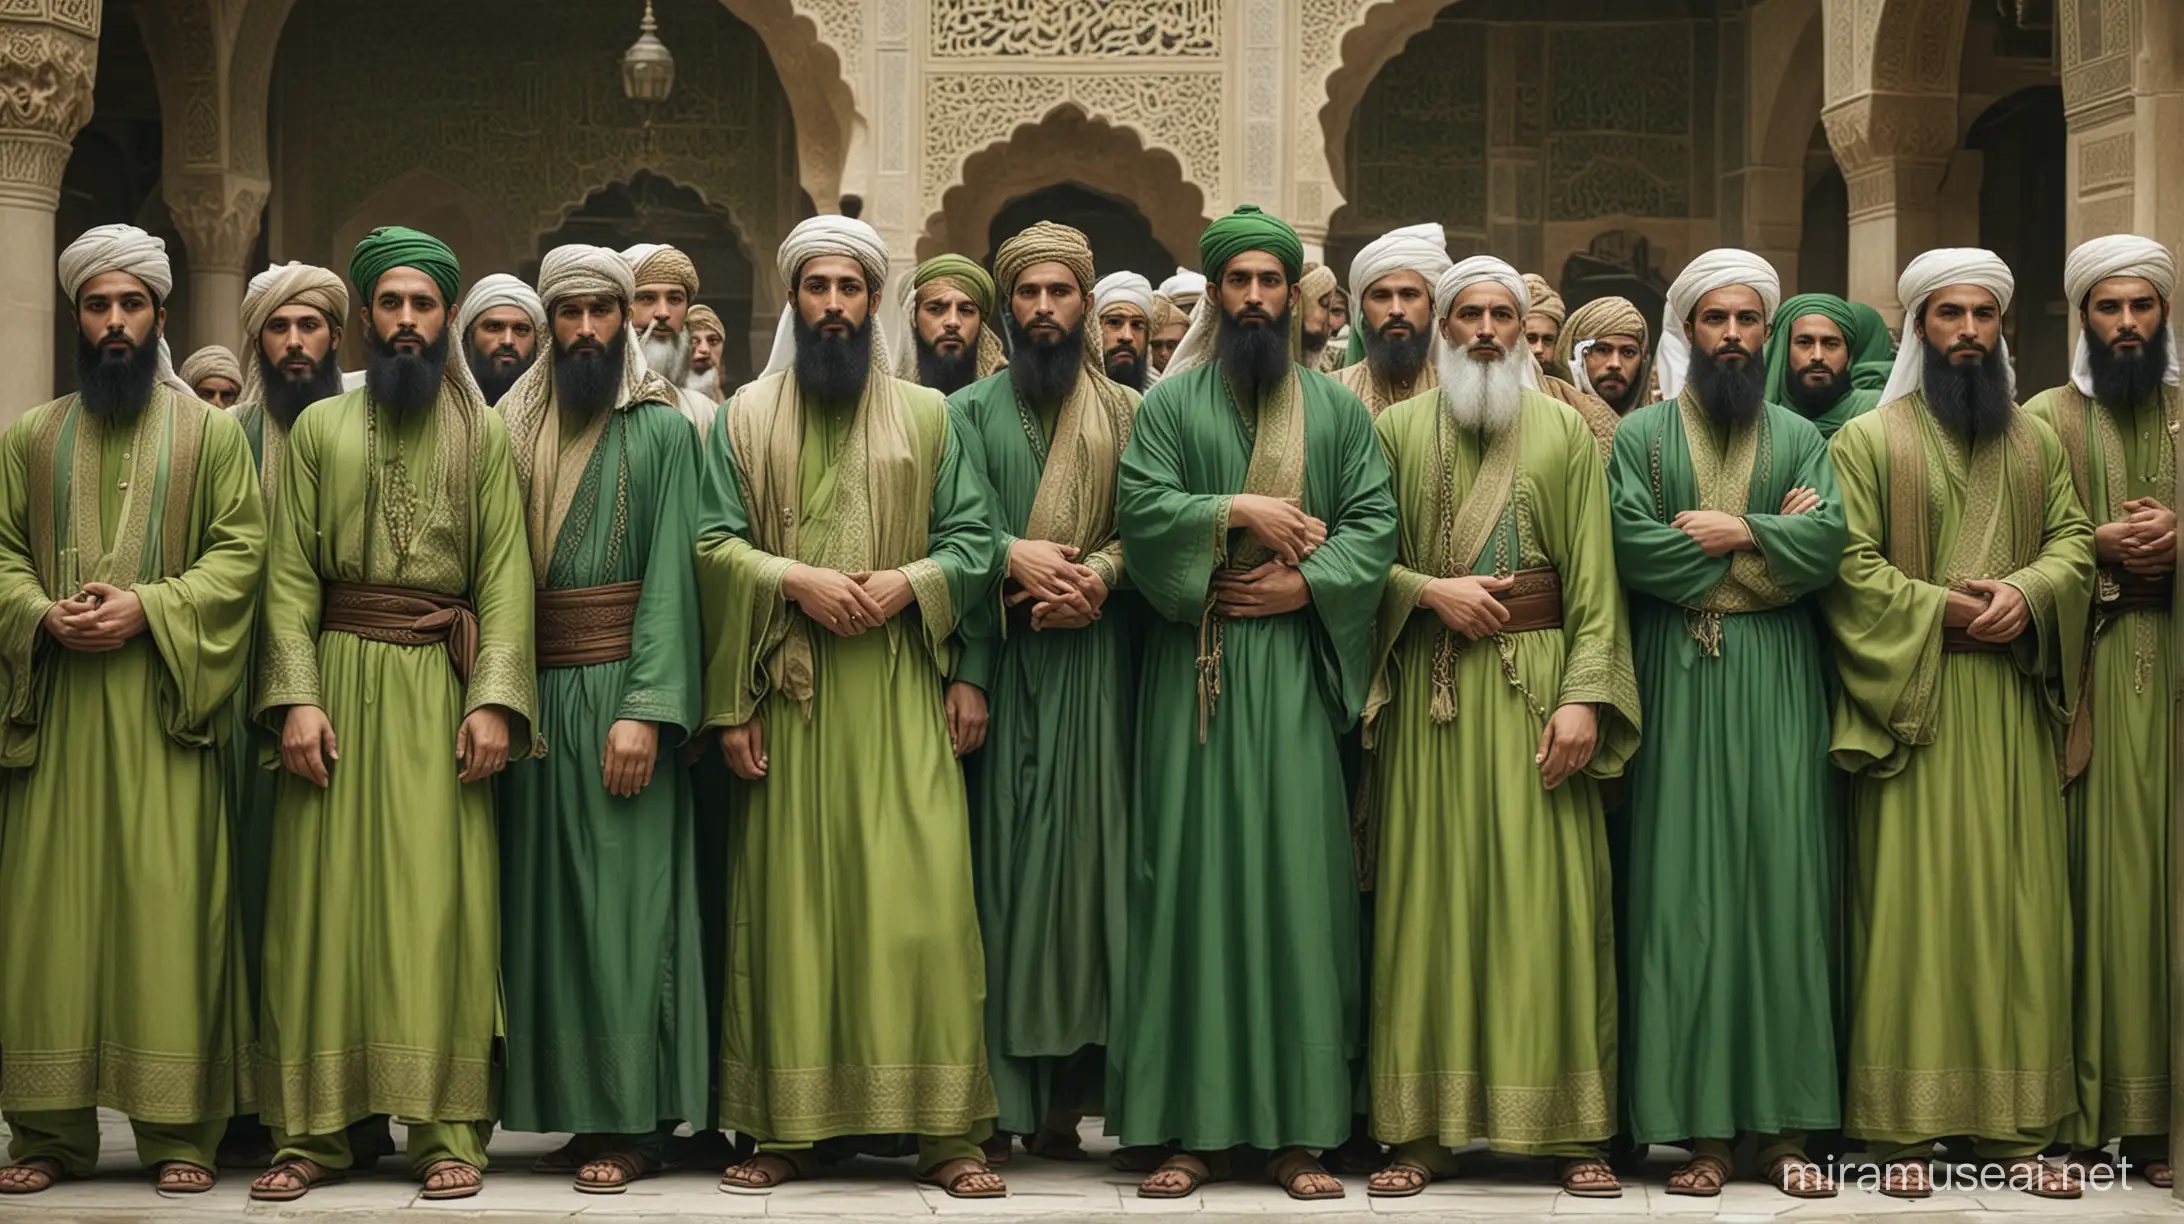 12 muslim caliphs in green clothes